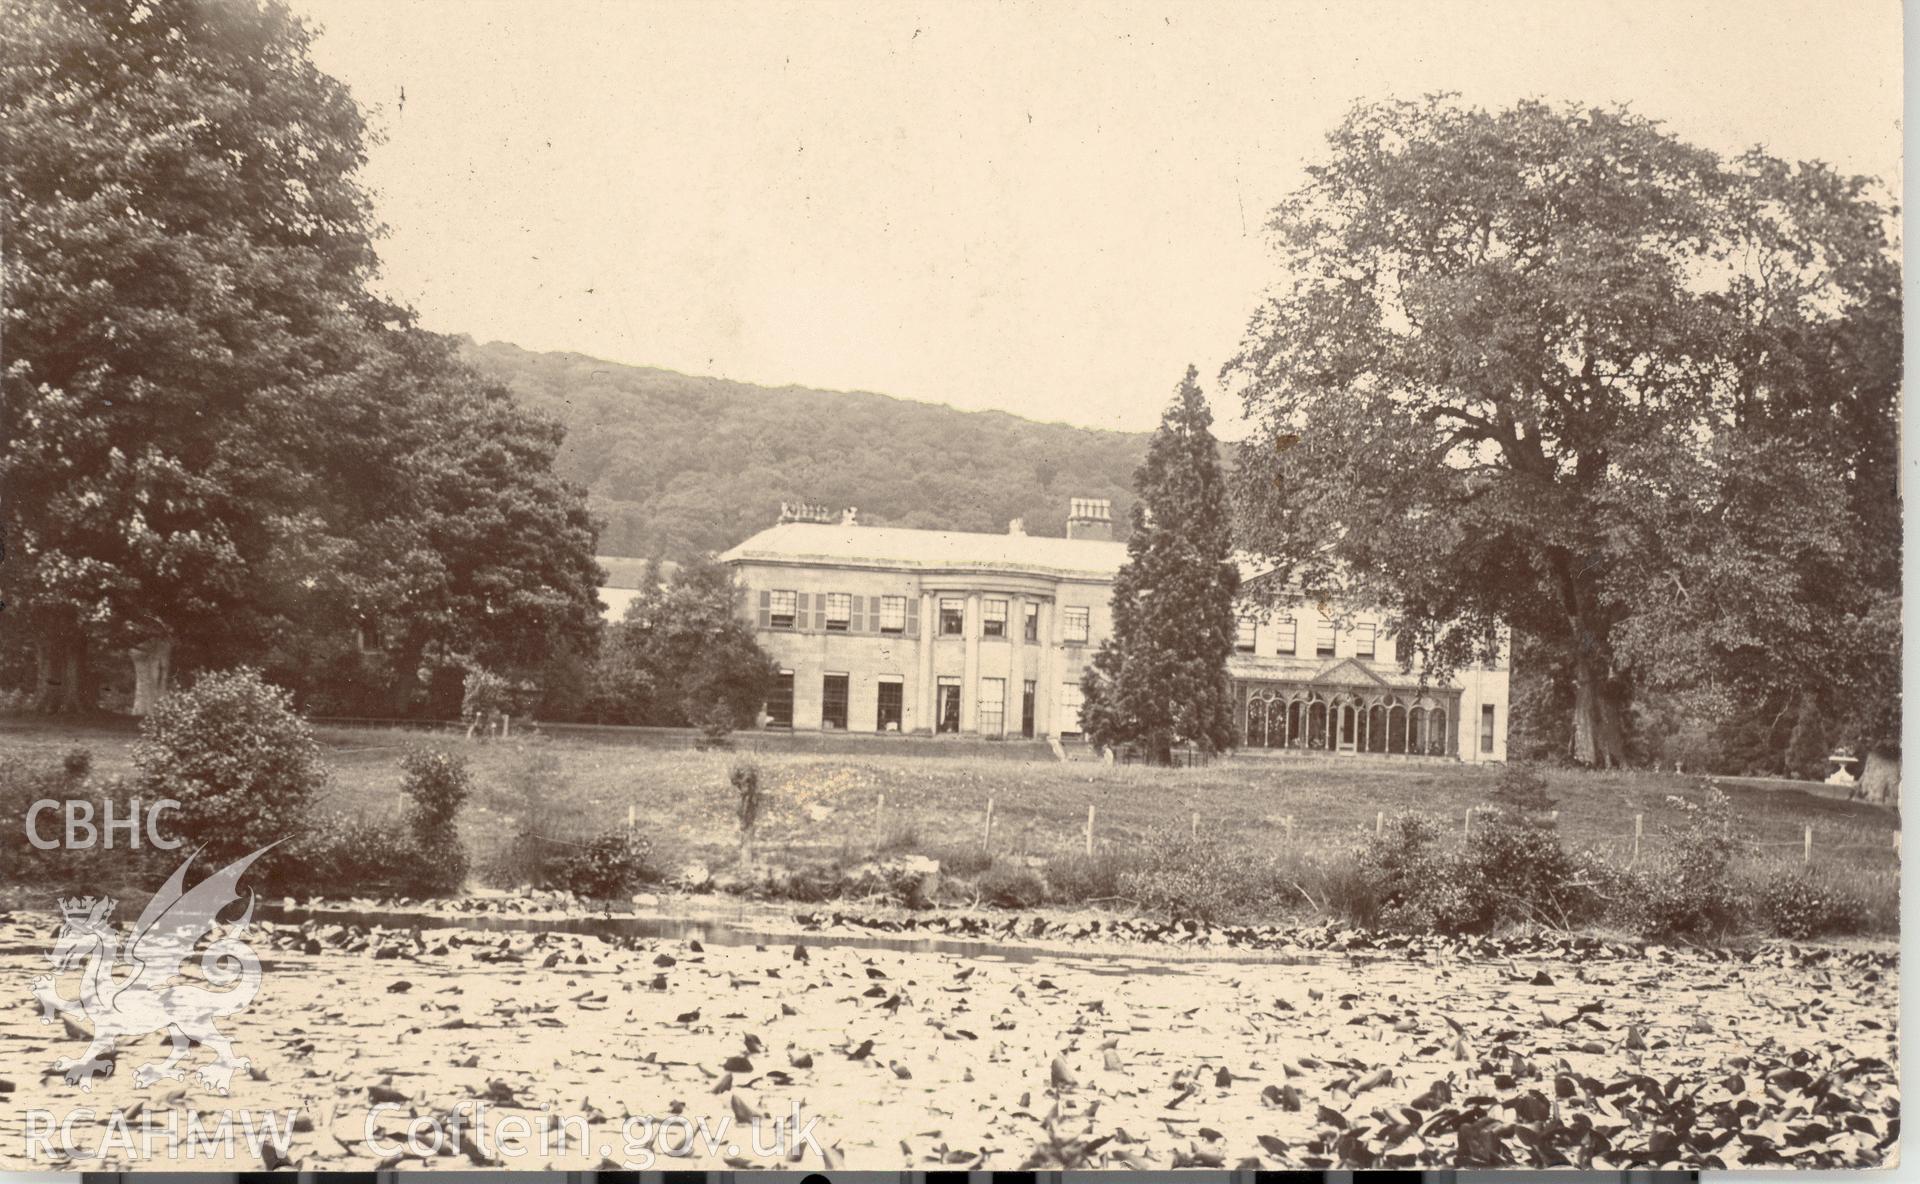 Digitised postcard image of R?g Hall, Corwen. Produced by Parks and Gardens Data Services, from an original item in the Peter Davis Collection at Parks and Gardens UK. We hold only web-resolution images of this collection, suitable for viewing on screen and for research purposes only. We do not hold the original images, or publication quality scans.